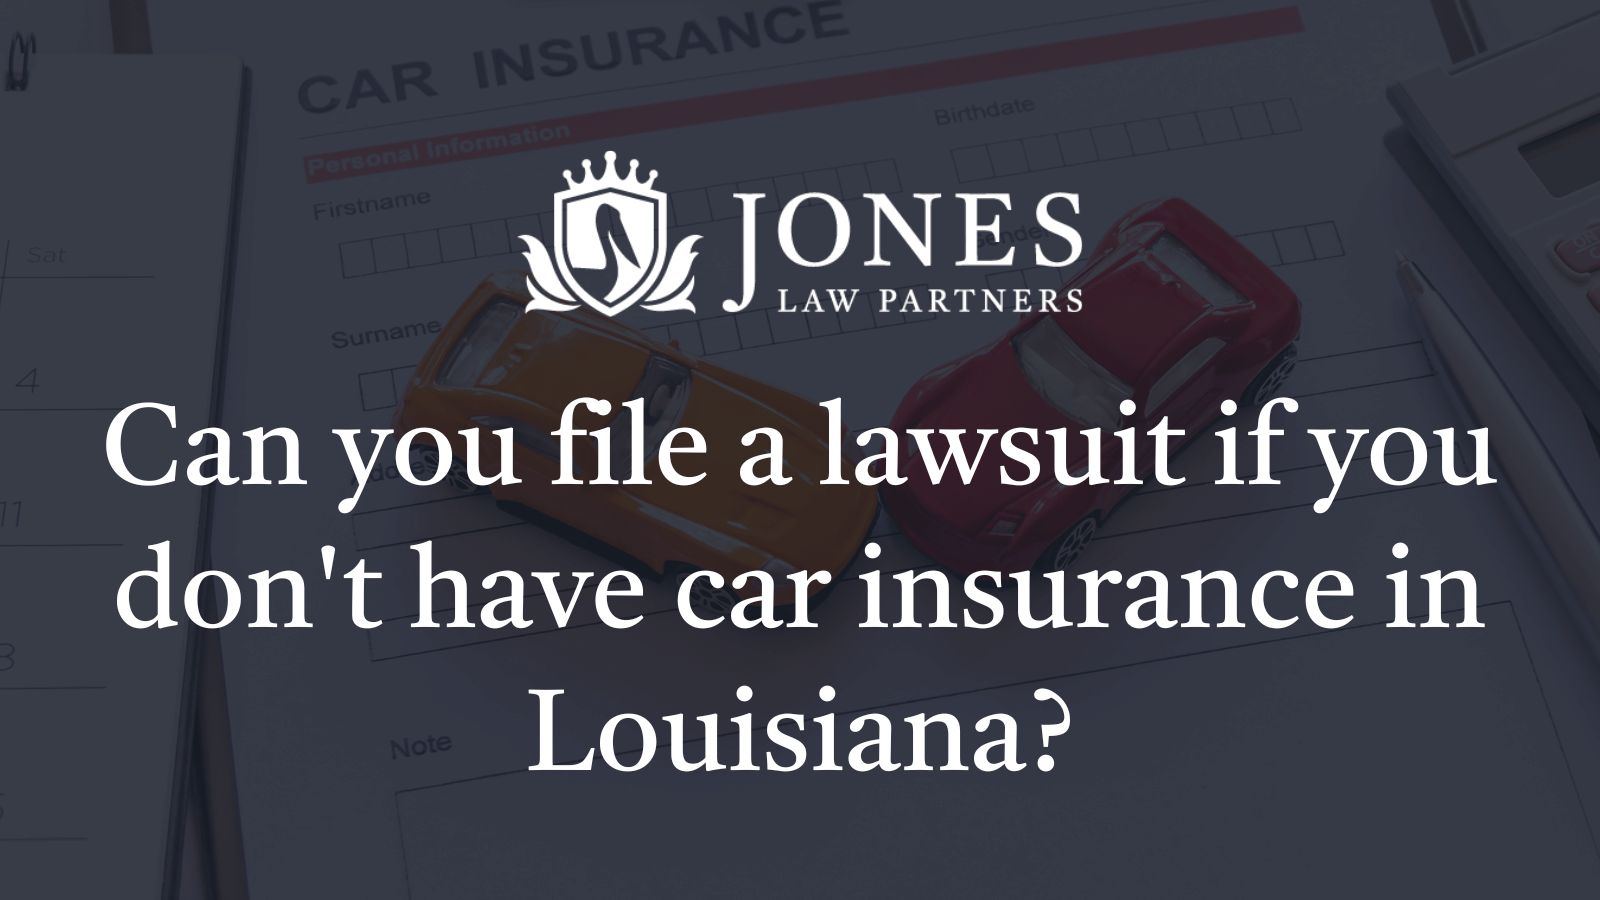 Can you file a lawsuit if you don't have car insurance in Louisiana - Jones Law Partners alexandria louisiana